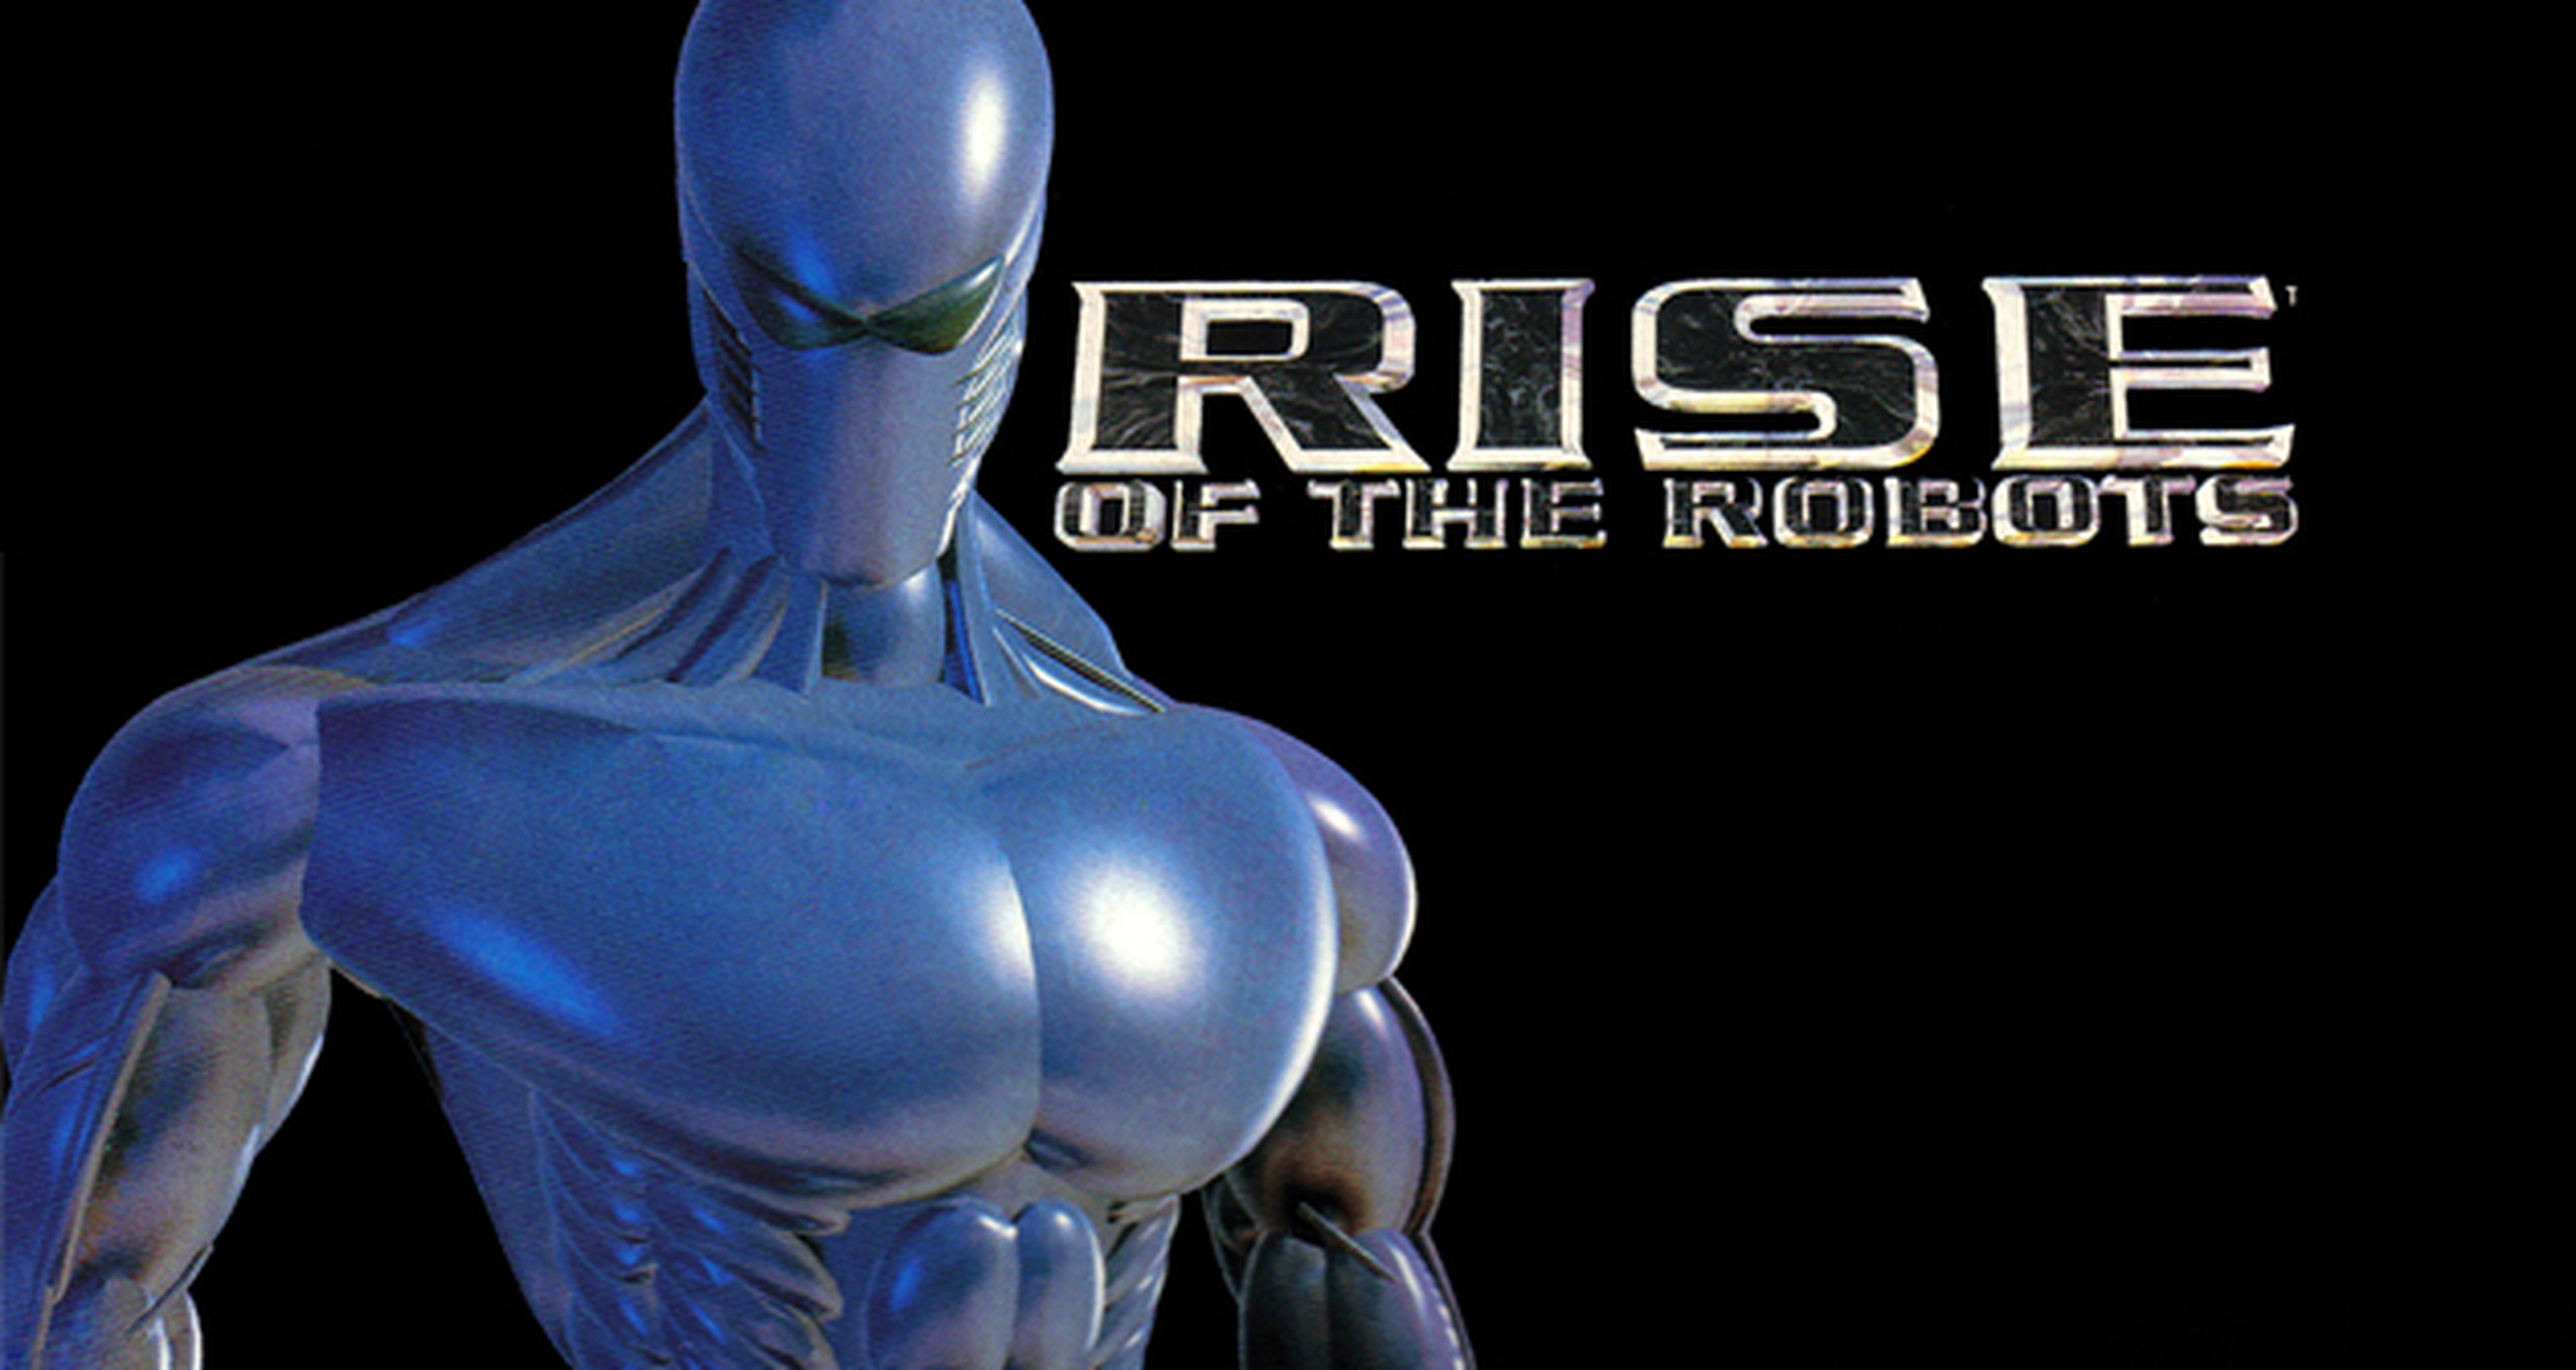 Hobby Consolas, hace 20 años: Rise of the Robots